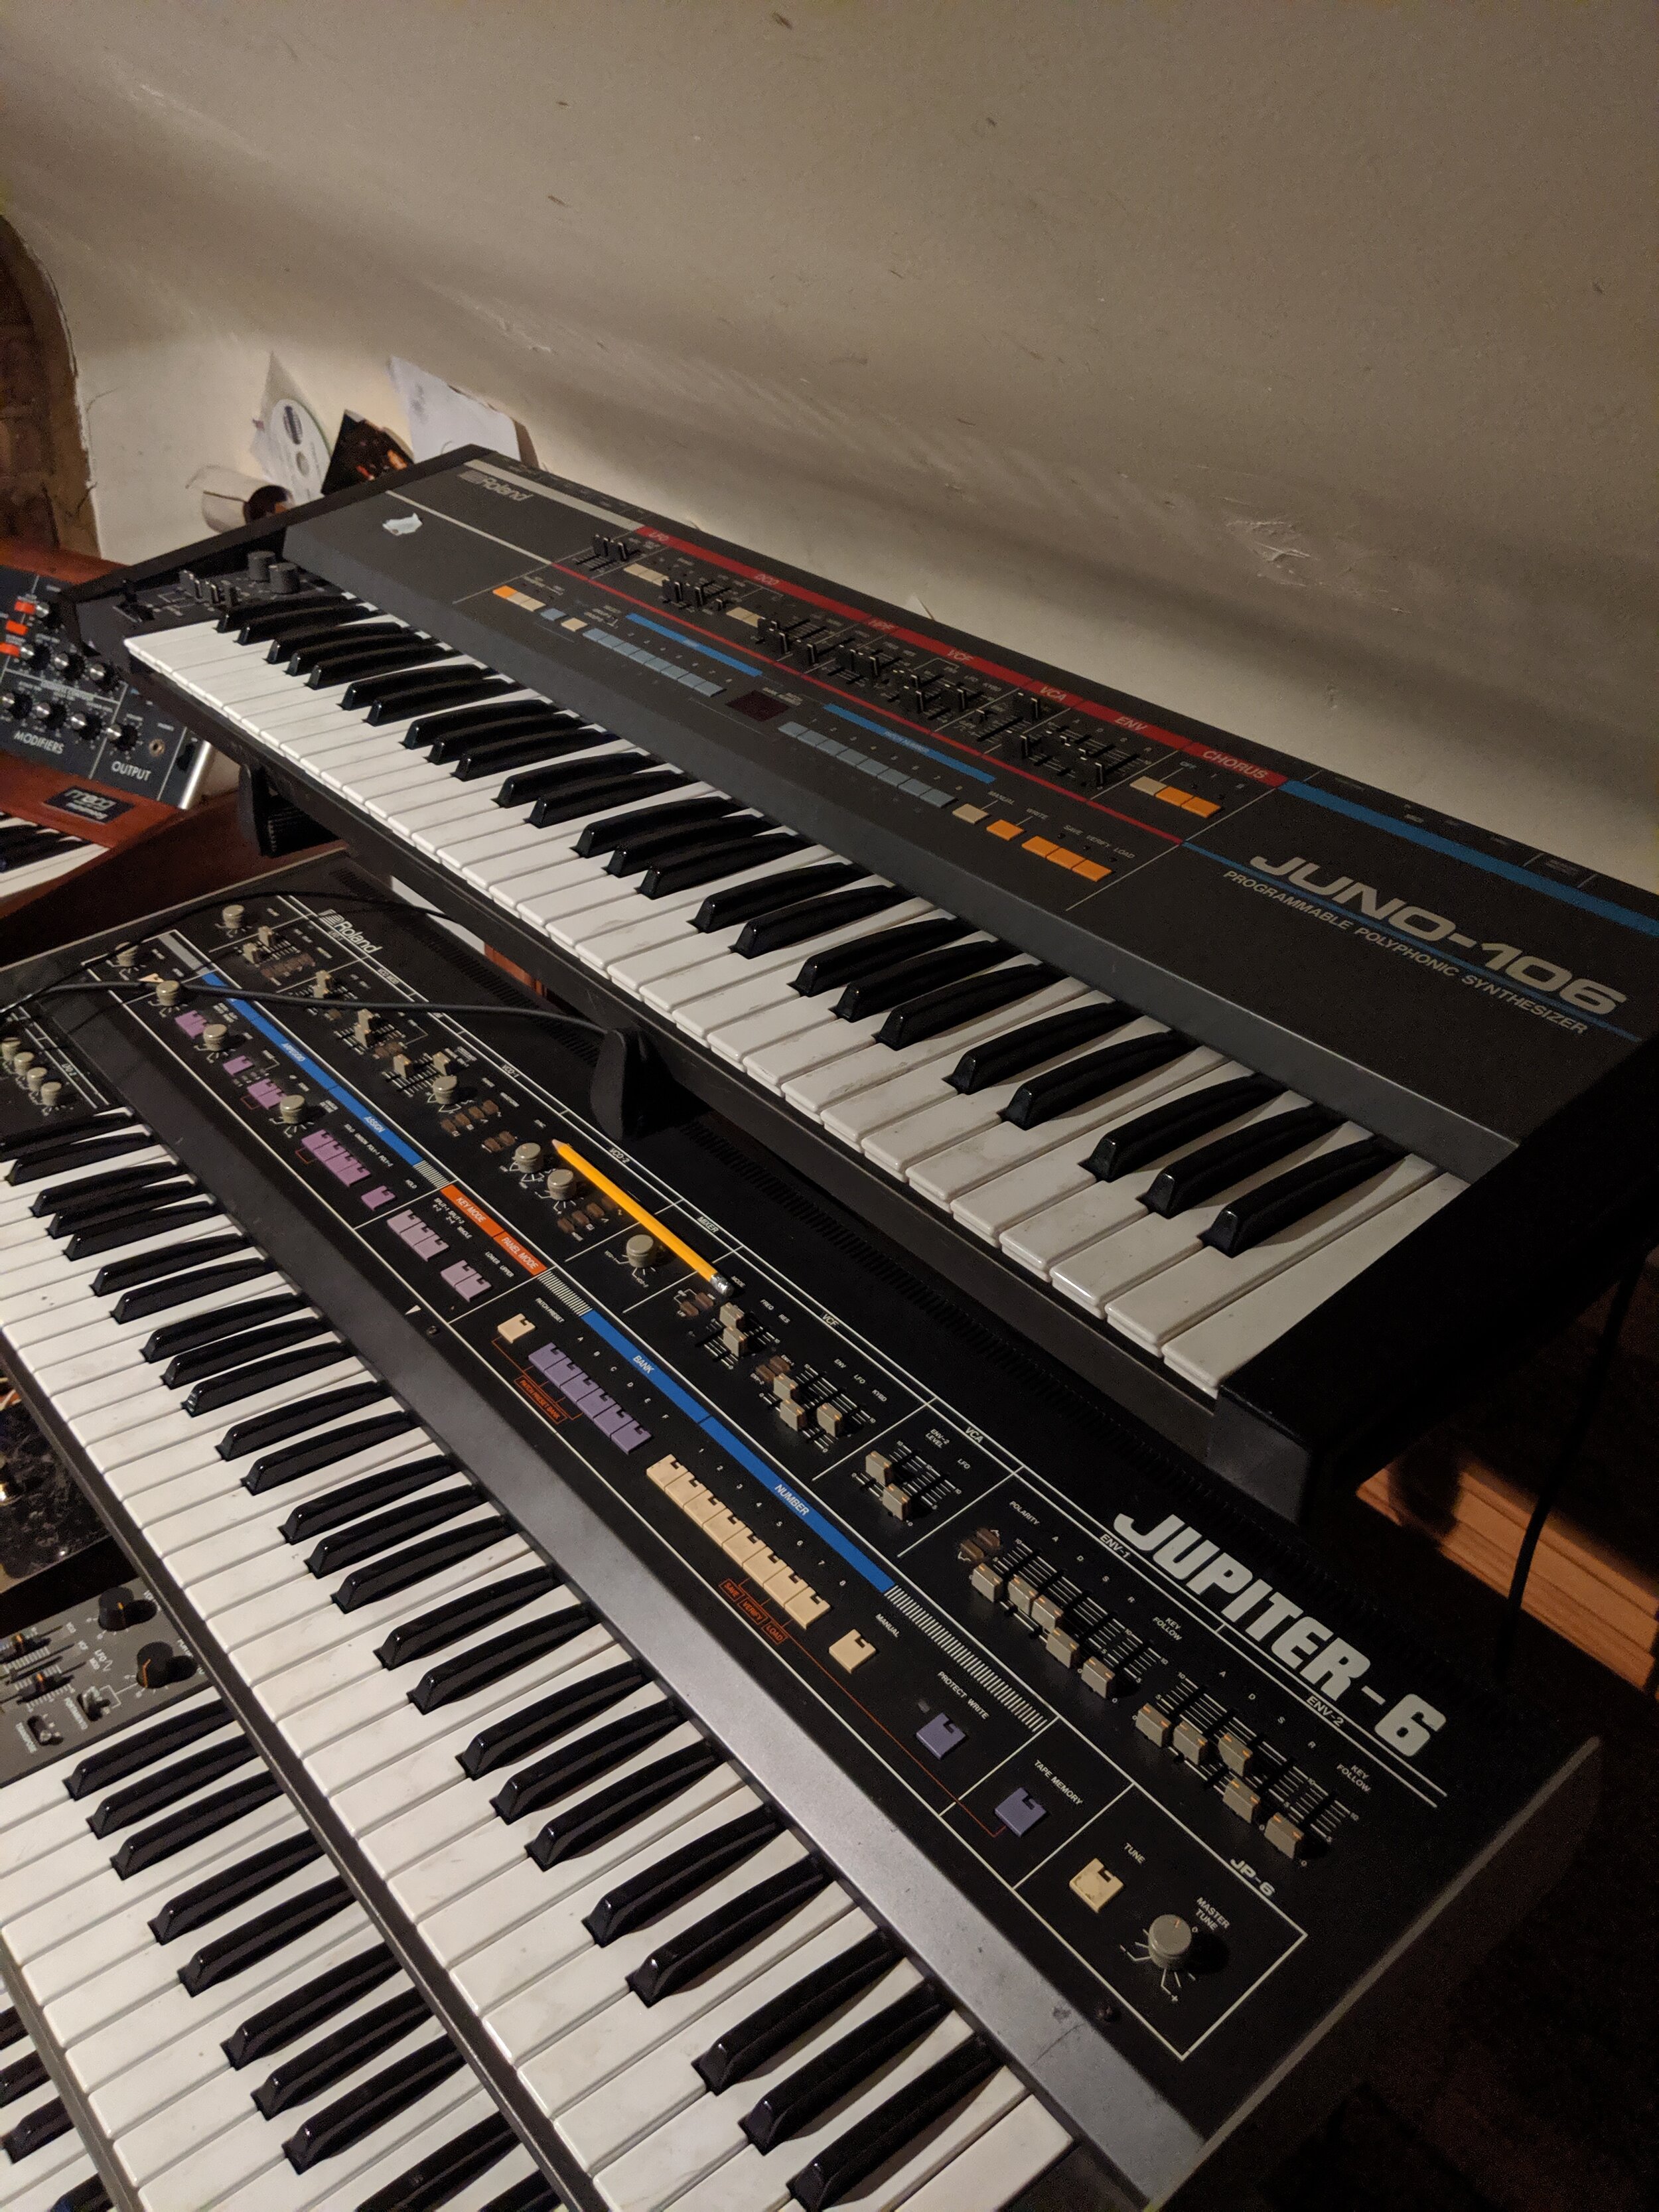 The synth stack